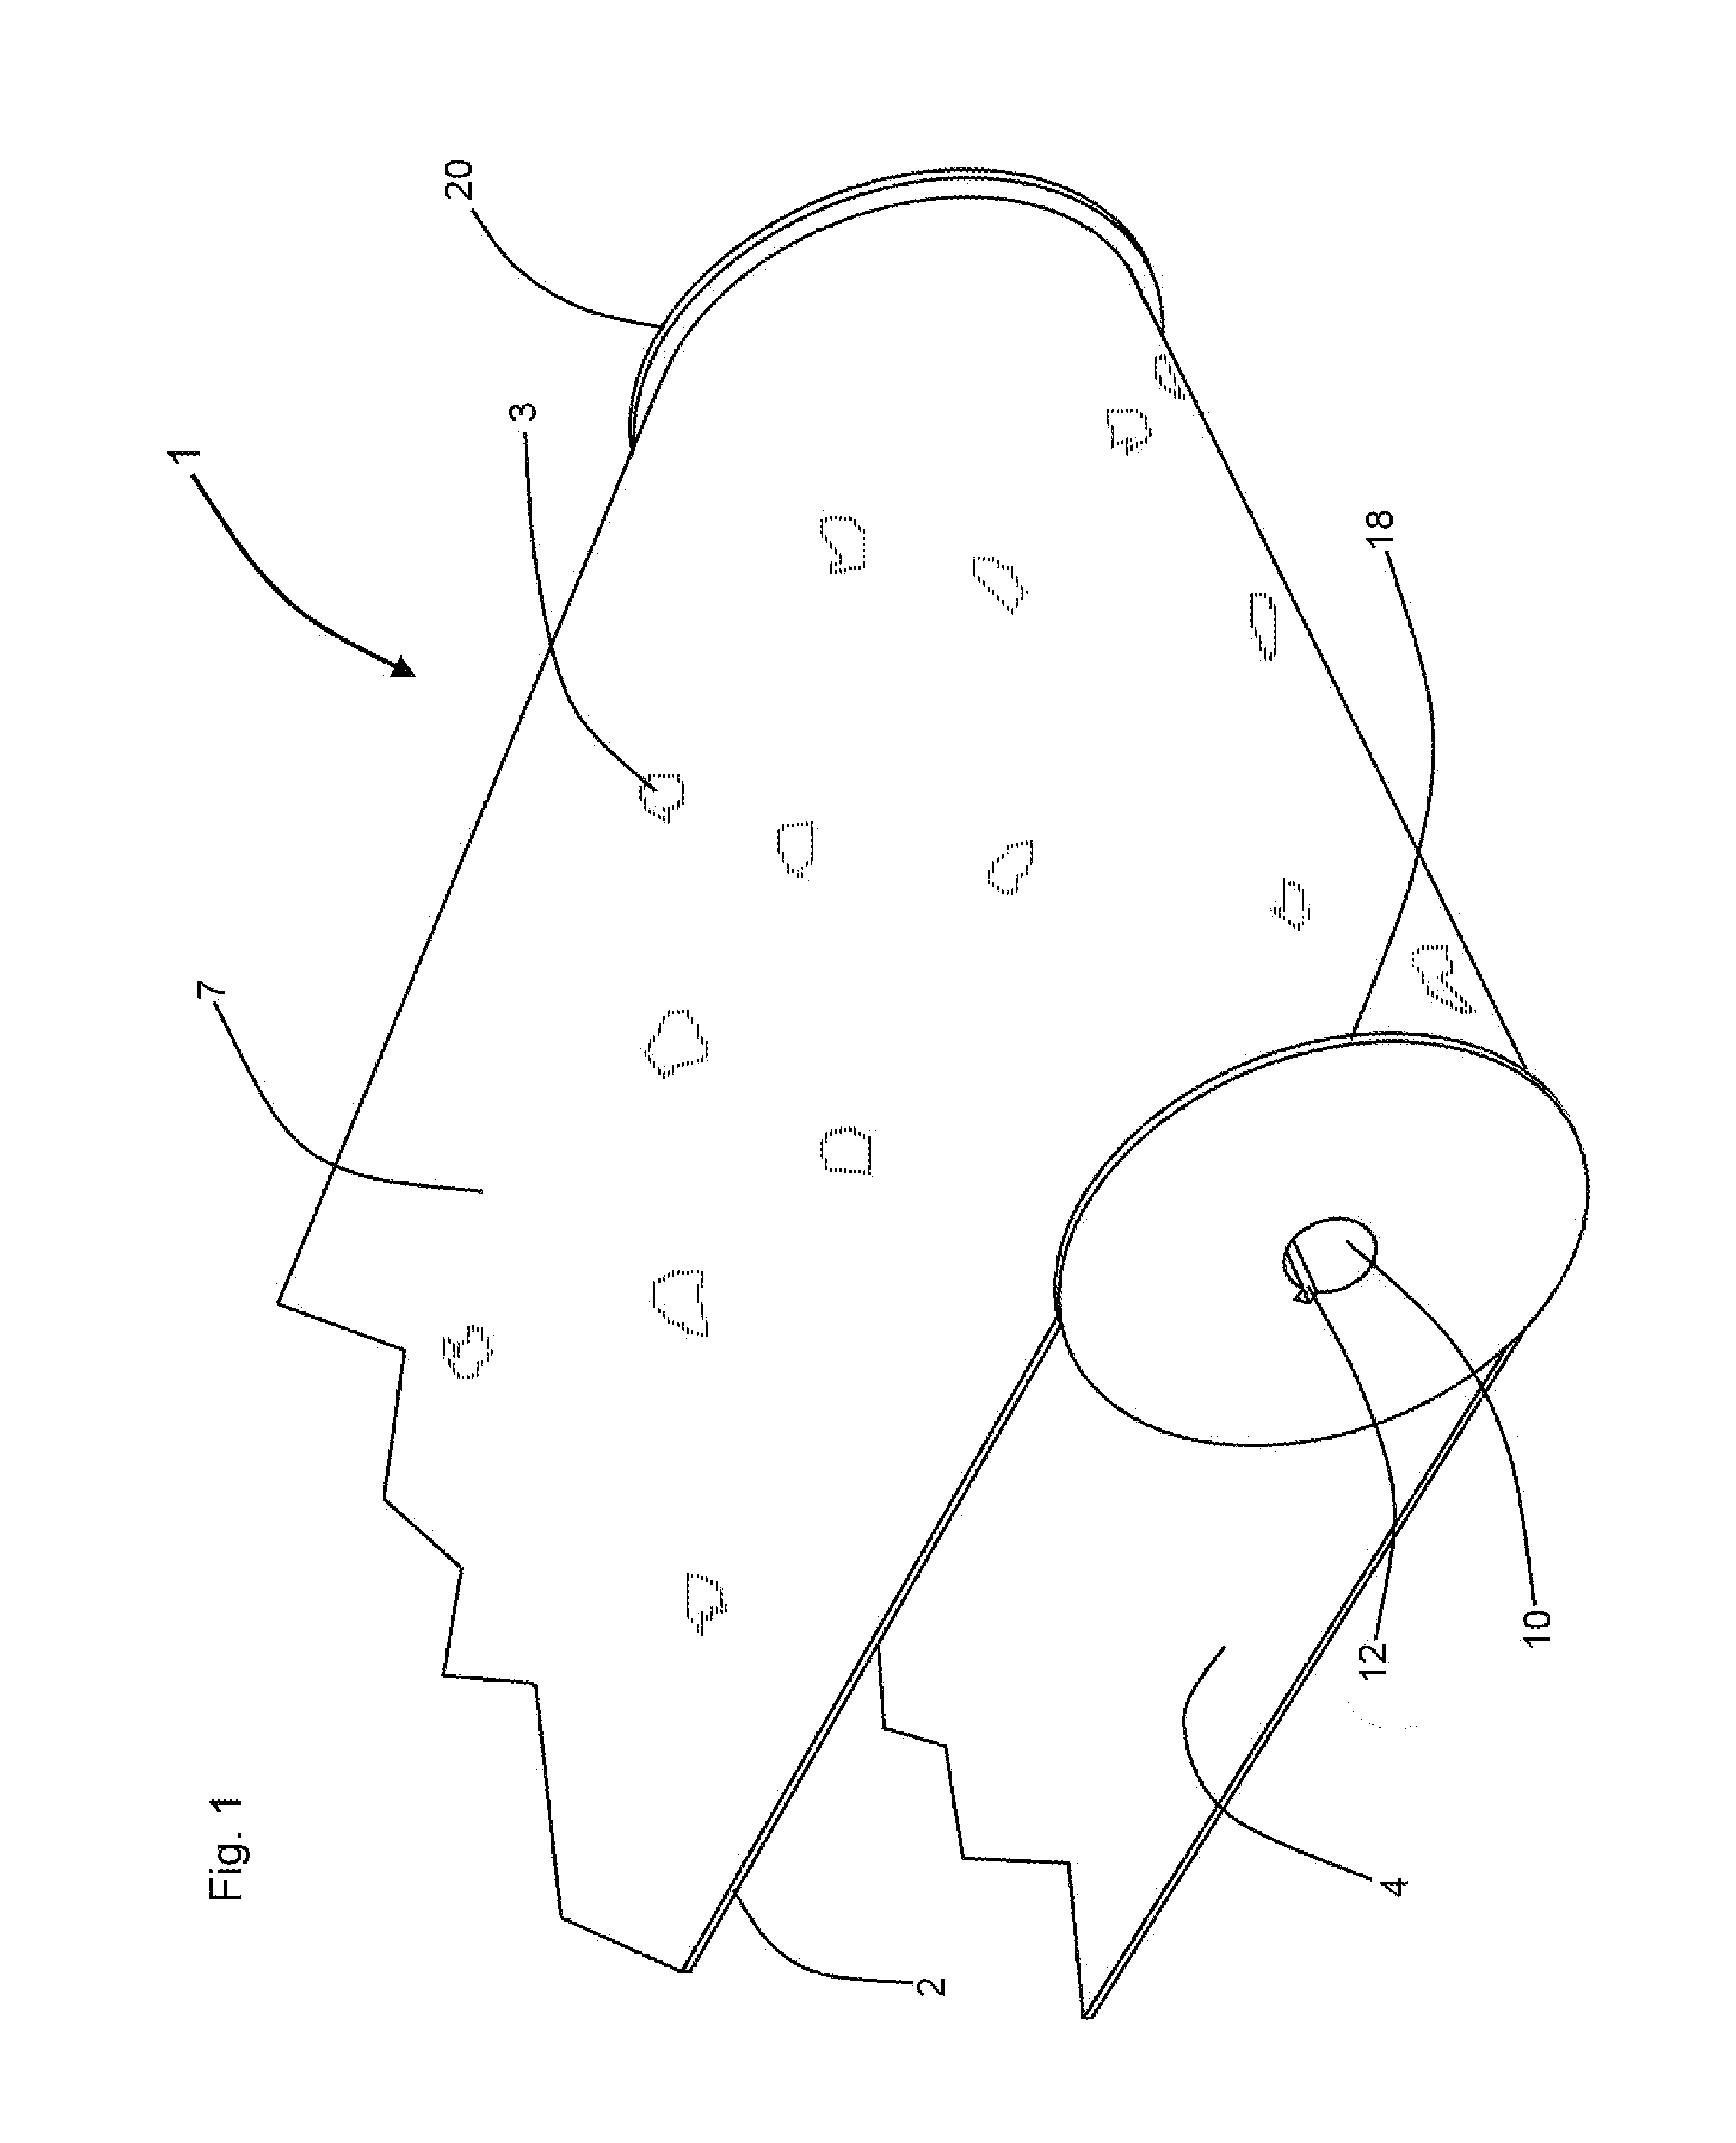 Magnetic assembly for loading and conveying ferrous metal articles